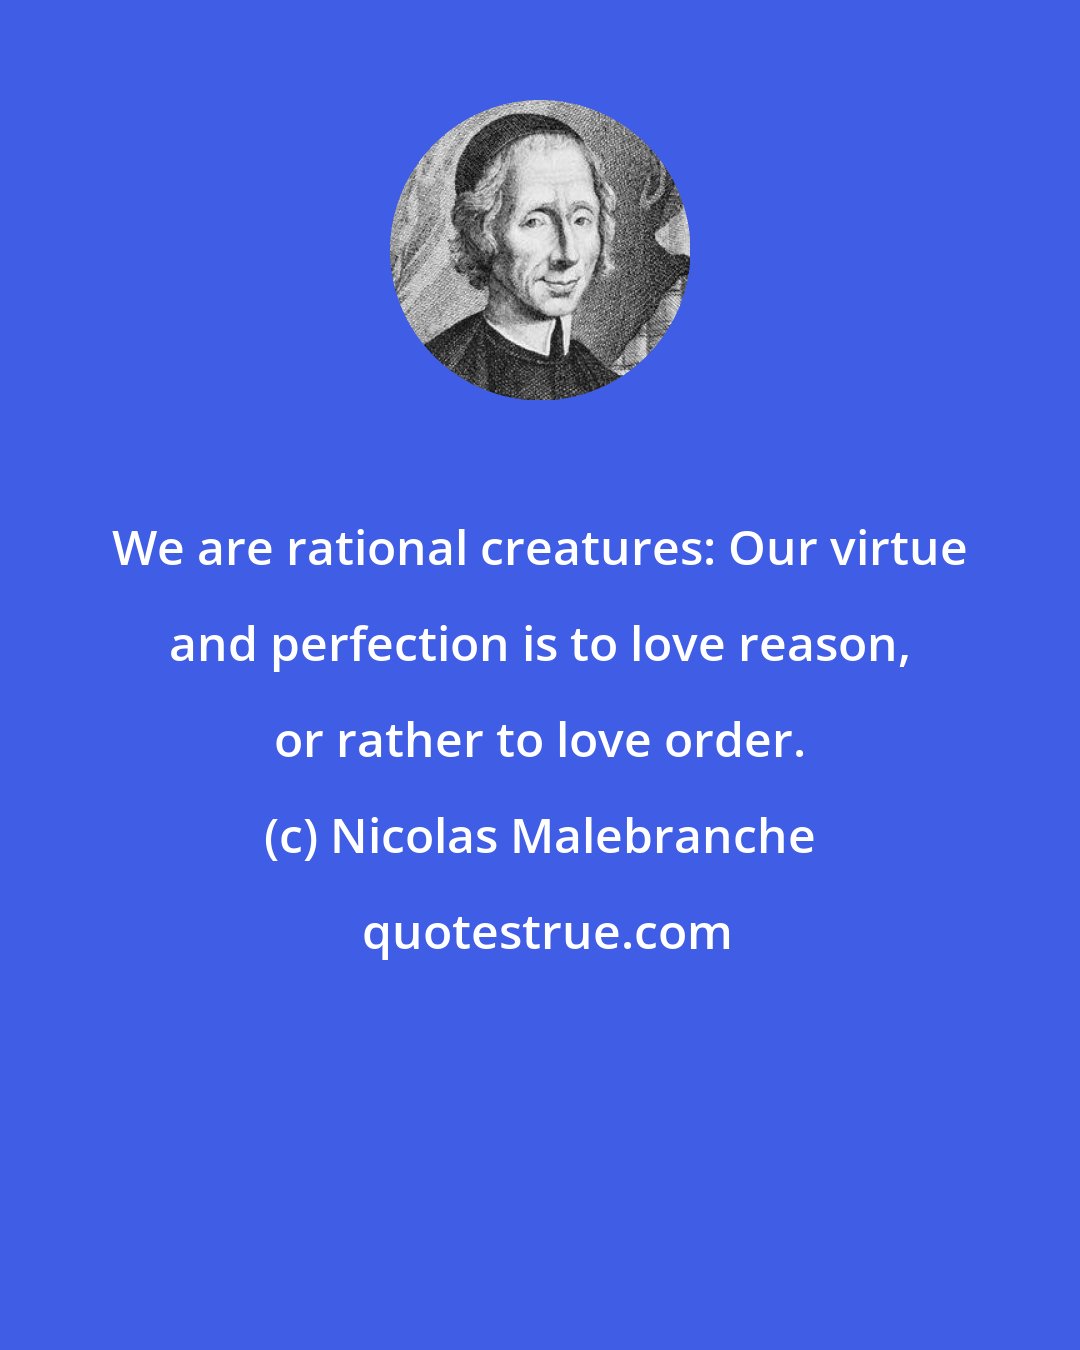 Nicolas Malebranche: We are rational creatures: Our virtue and perfection is to love reason, or rather to love order.